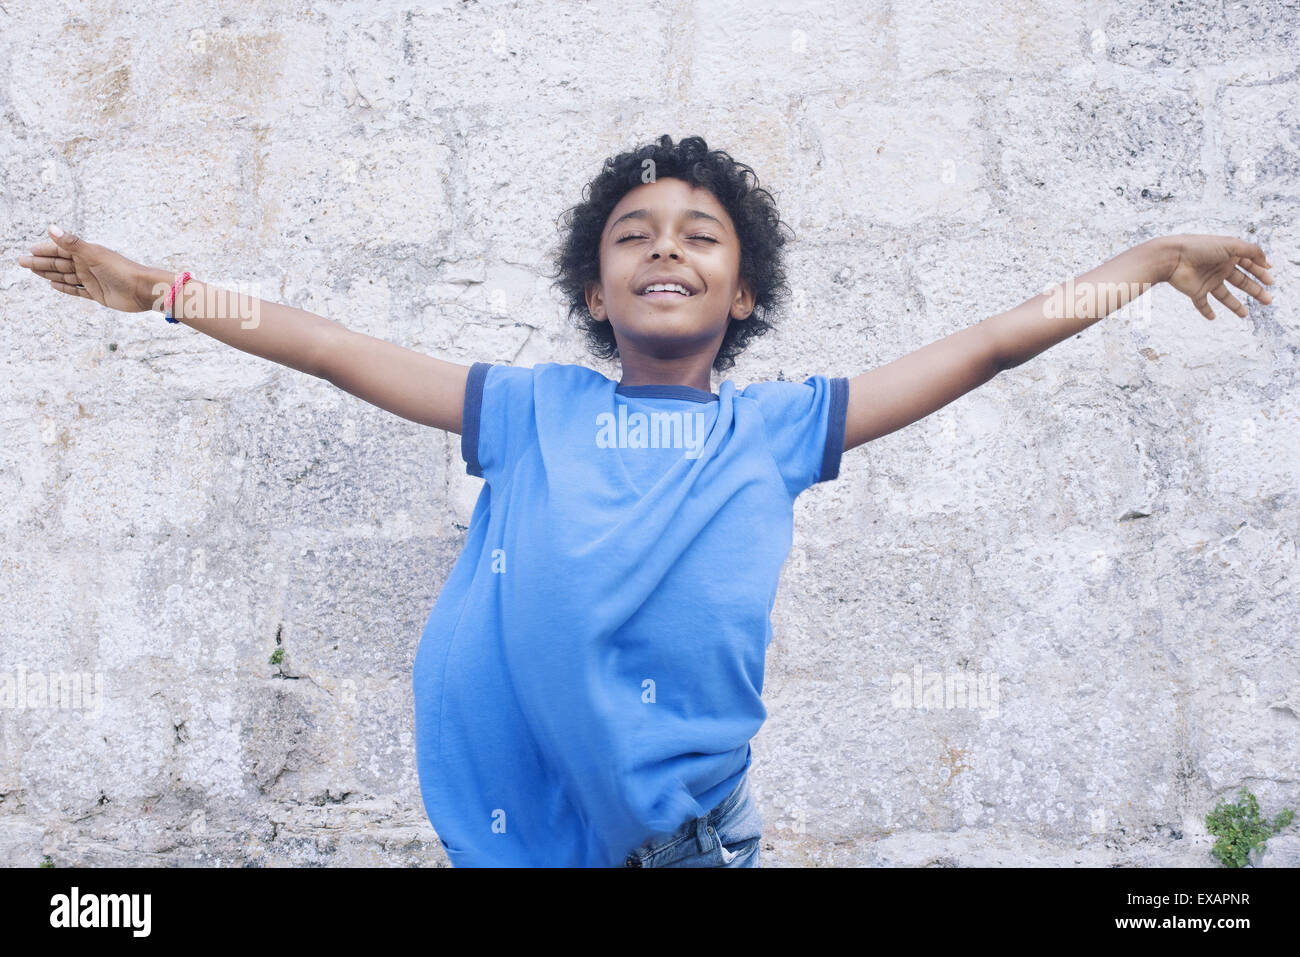 Boy standing with his arms outstretched, eyes closed, portrait Stock Photo